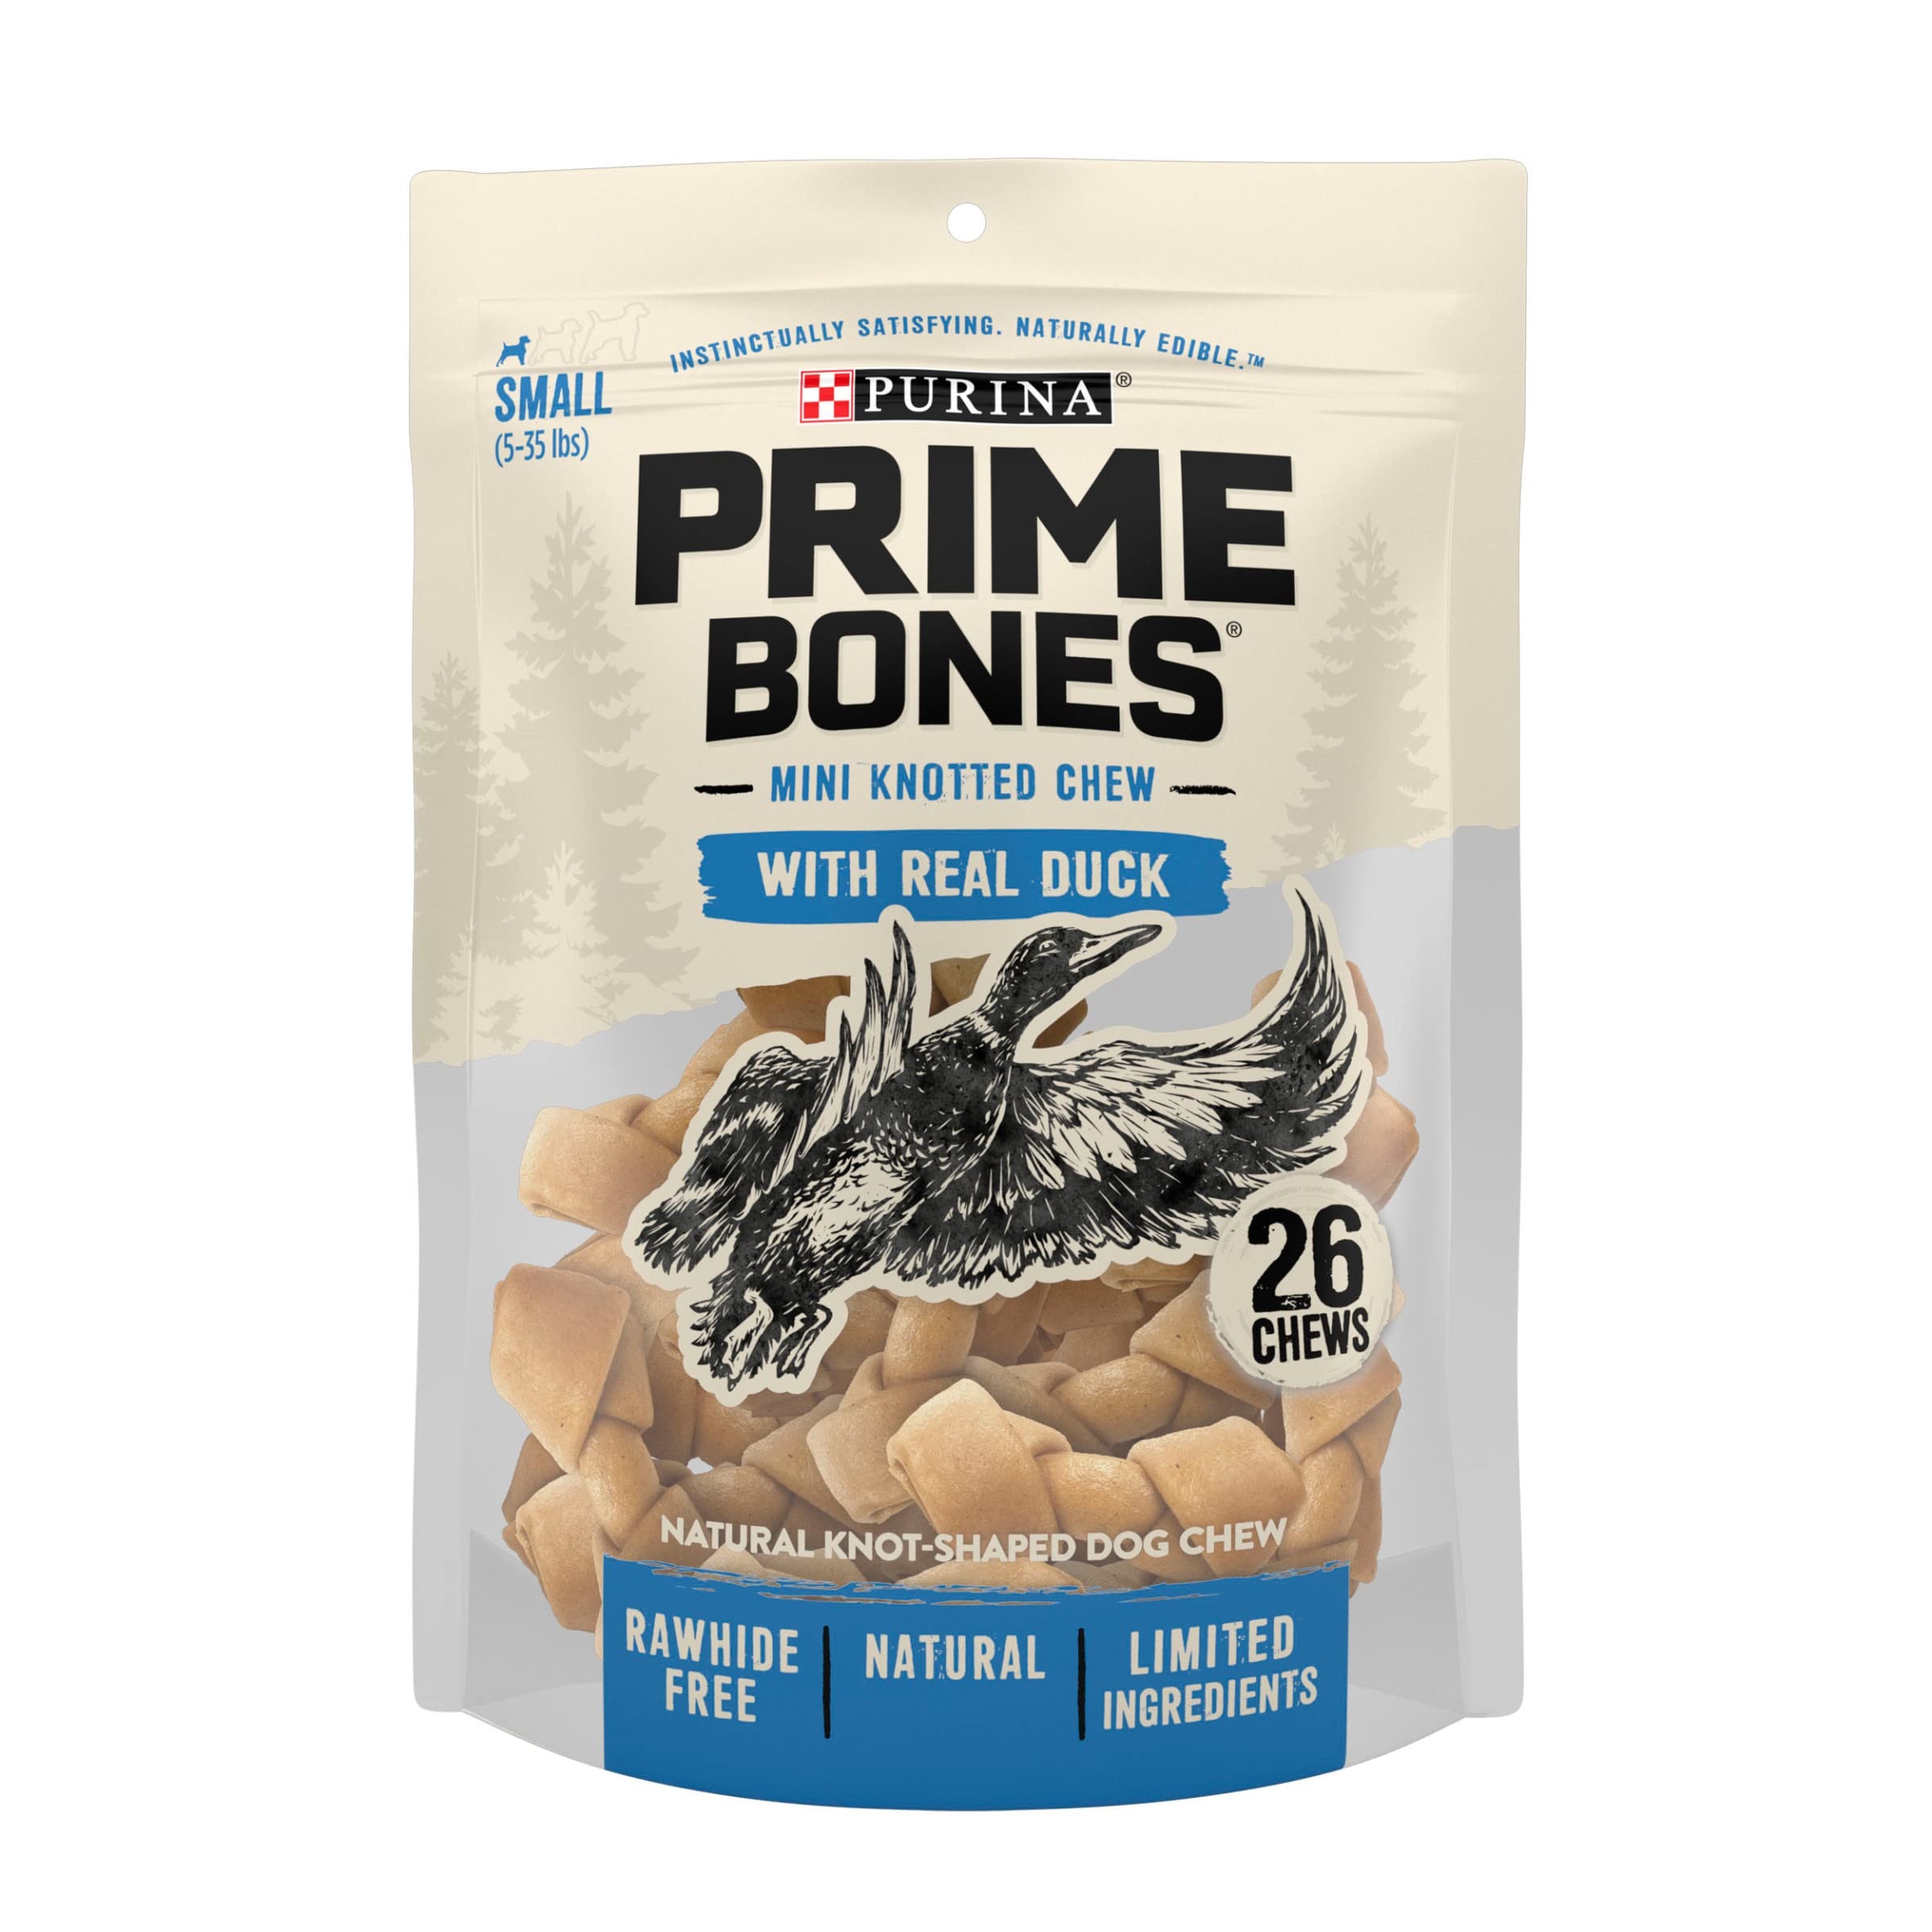 Save $2.00 OFF on Any ONE (1) Prime Bones Mini Knotted Chew Dog Treats